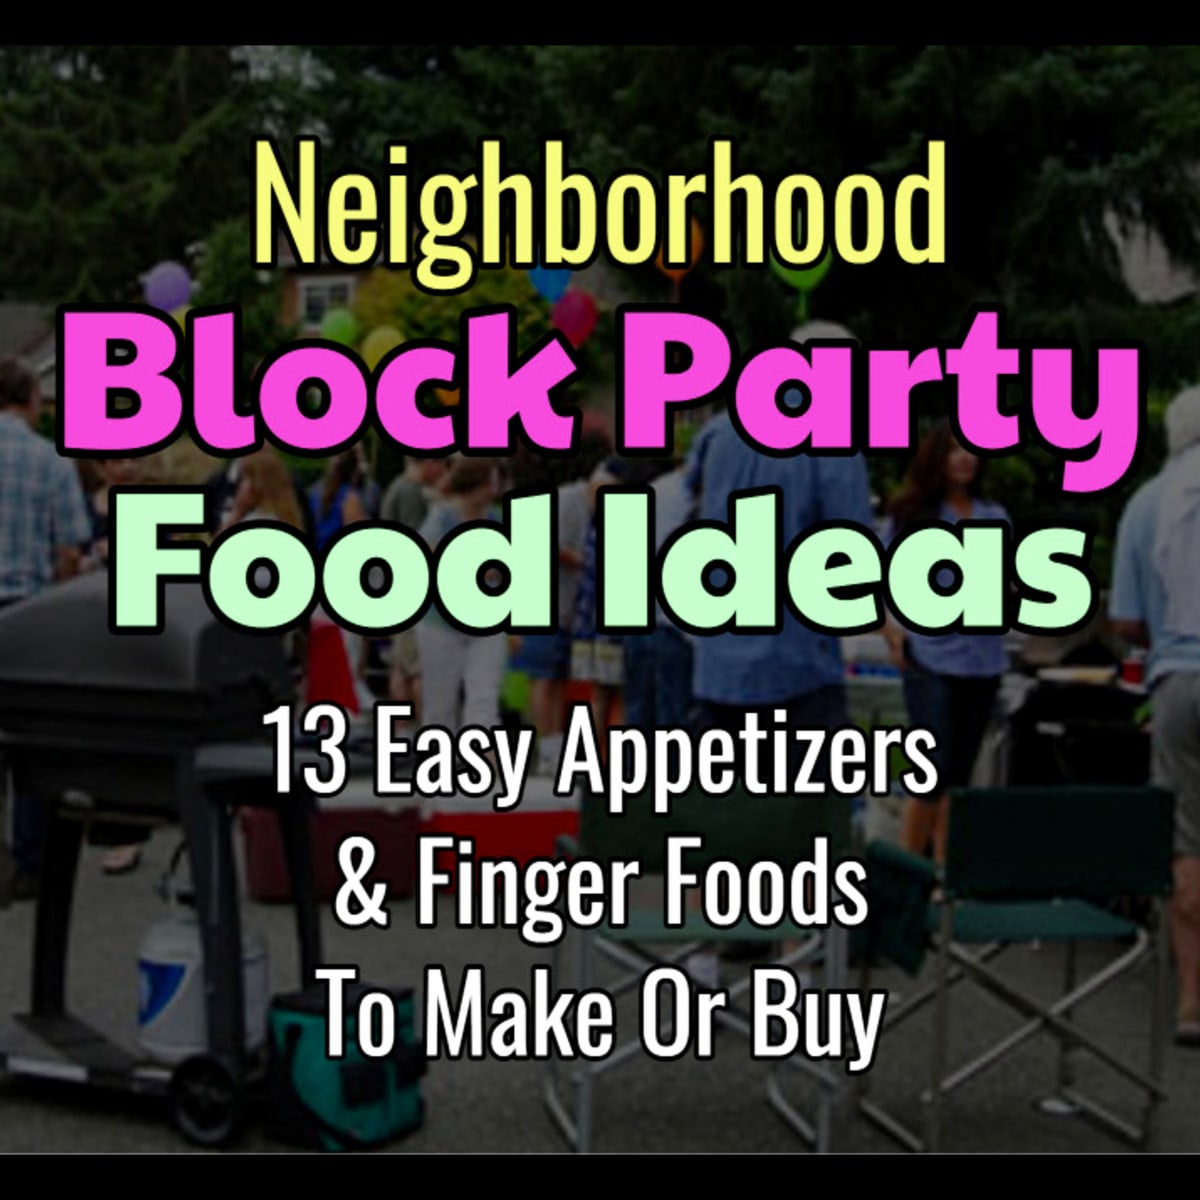 Block Party Finger Food Ideas For a Crowd - cheap and easy street party food ideas for a block party crowd in your neighborhood or community to put on your block party menu